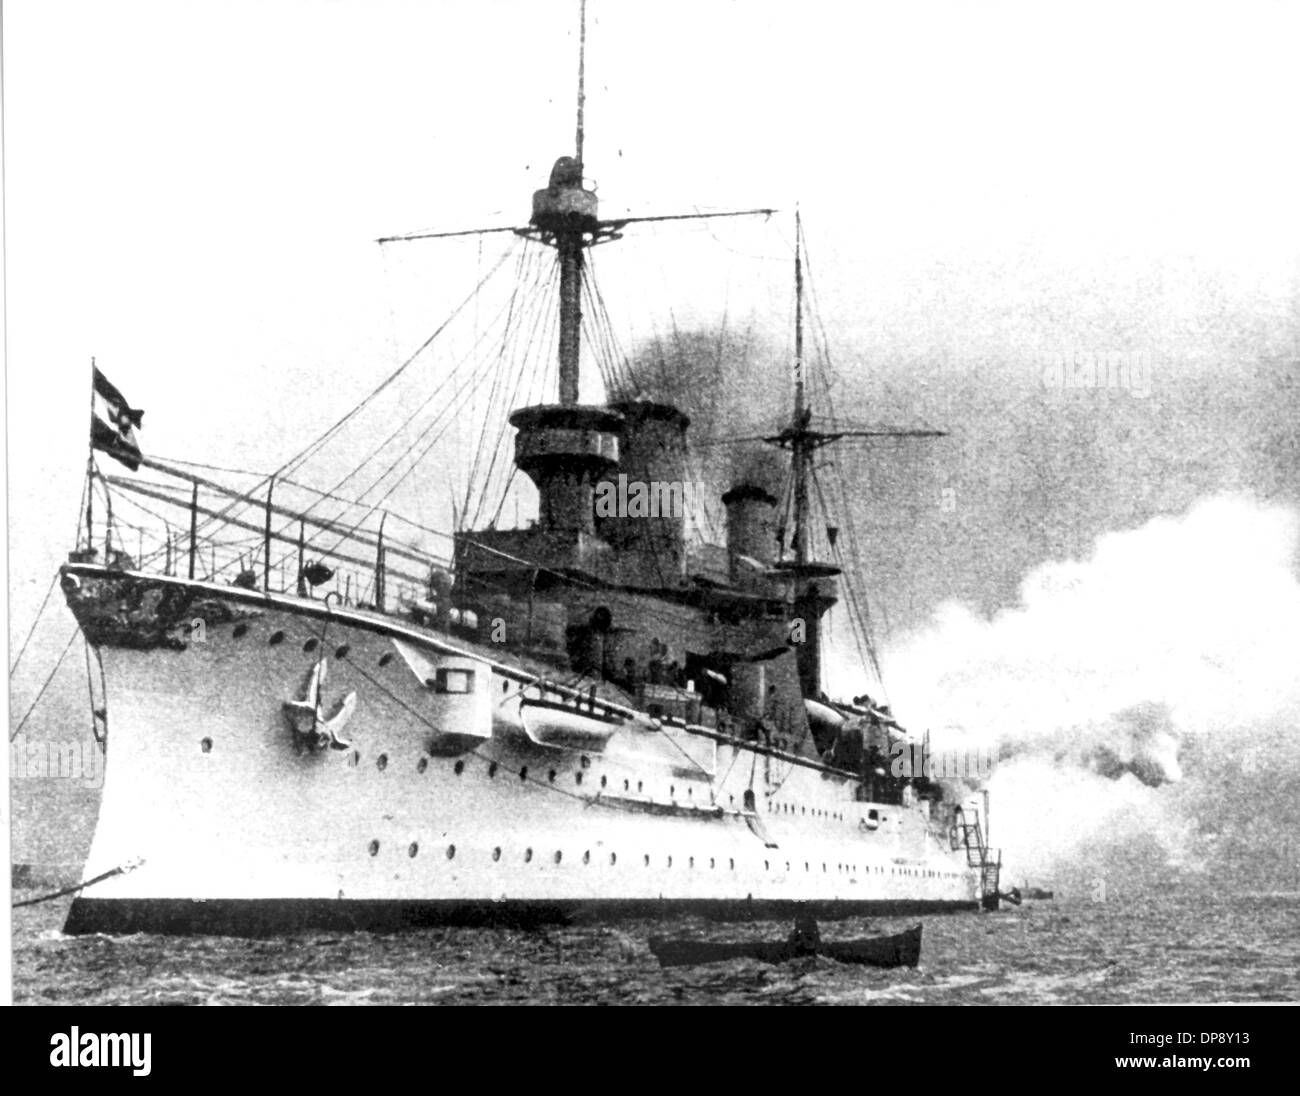 The armoured cruiser S.M.S. (German abbreviation for 'His Majesty's Ship) 'Fürst Bismarck' of the German Imperial navy. Great Britain took offence with the steadily stronger German navy and feared its world power. The development led to World War I. Stock Photo